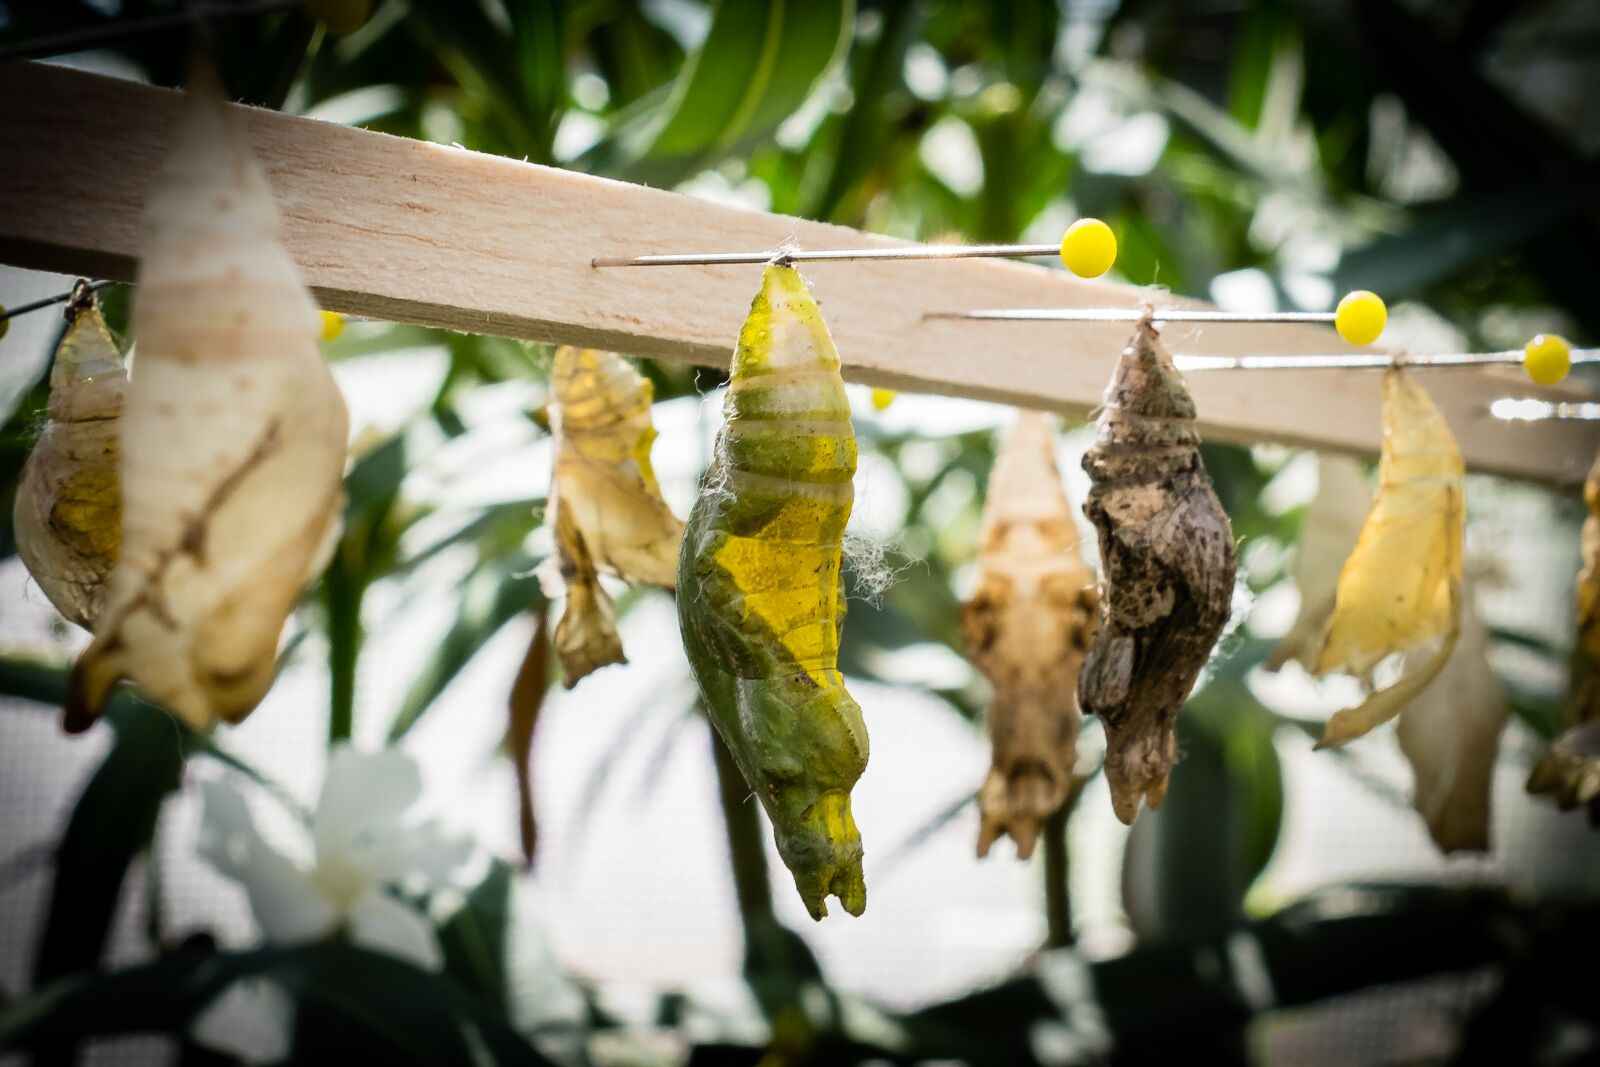 Fujifilm X-T2 sample photo. Cocoon, butterfly, metamorphosis photography